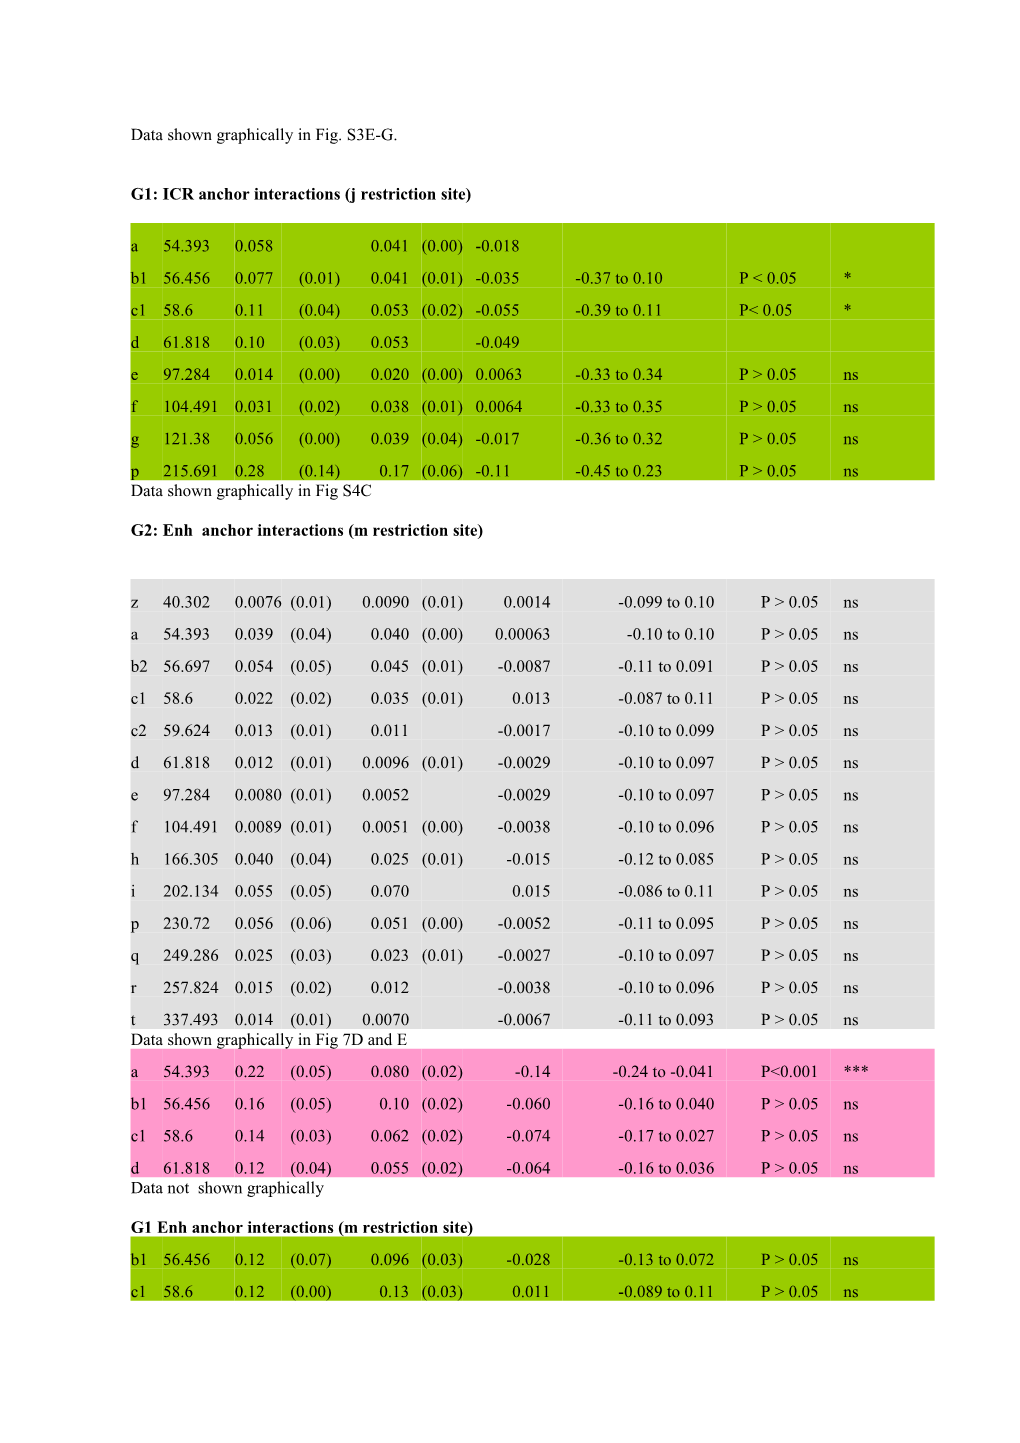 Table S1: Statistical Analysis of Difference in Locus-Wide Association Frequencies With